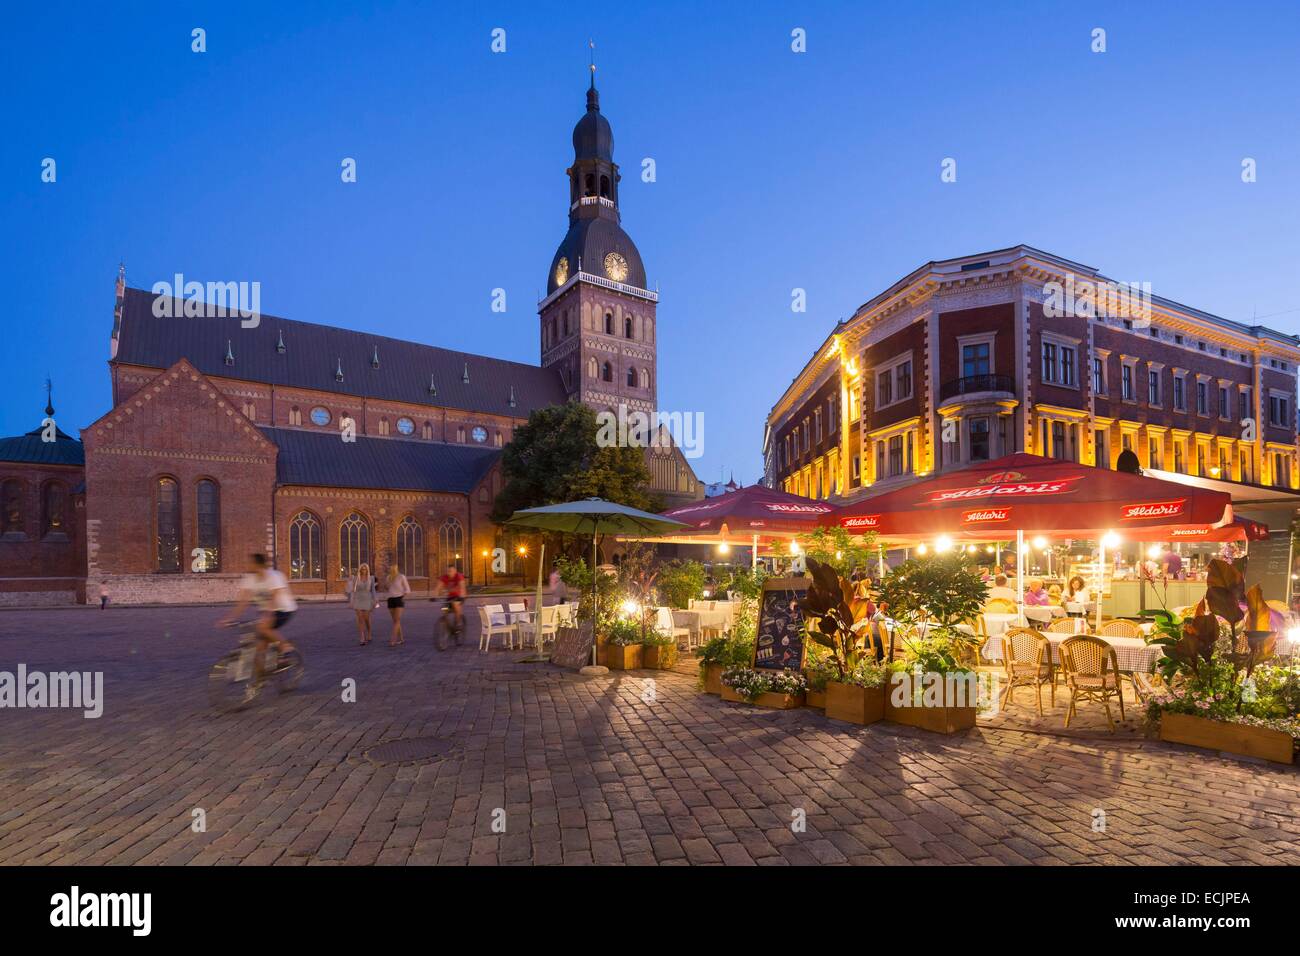 Latvia (Baltic States), Riga, European capital of culture 2014, historical centre listed as World Heritage by UNESCO, terrasses in the city center and the Dome cathédrale Stock Photo